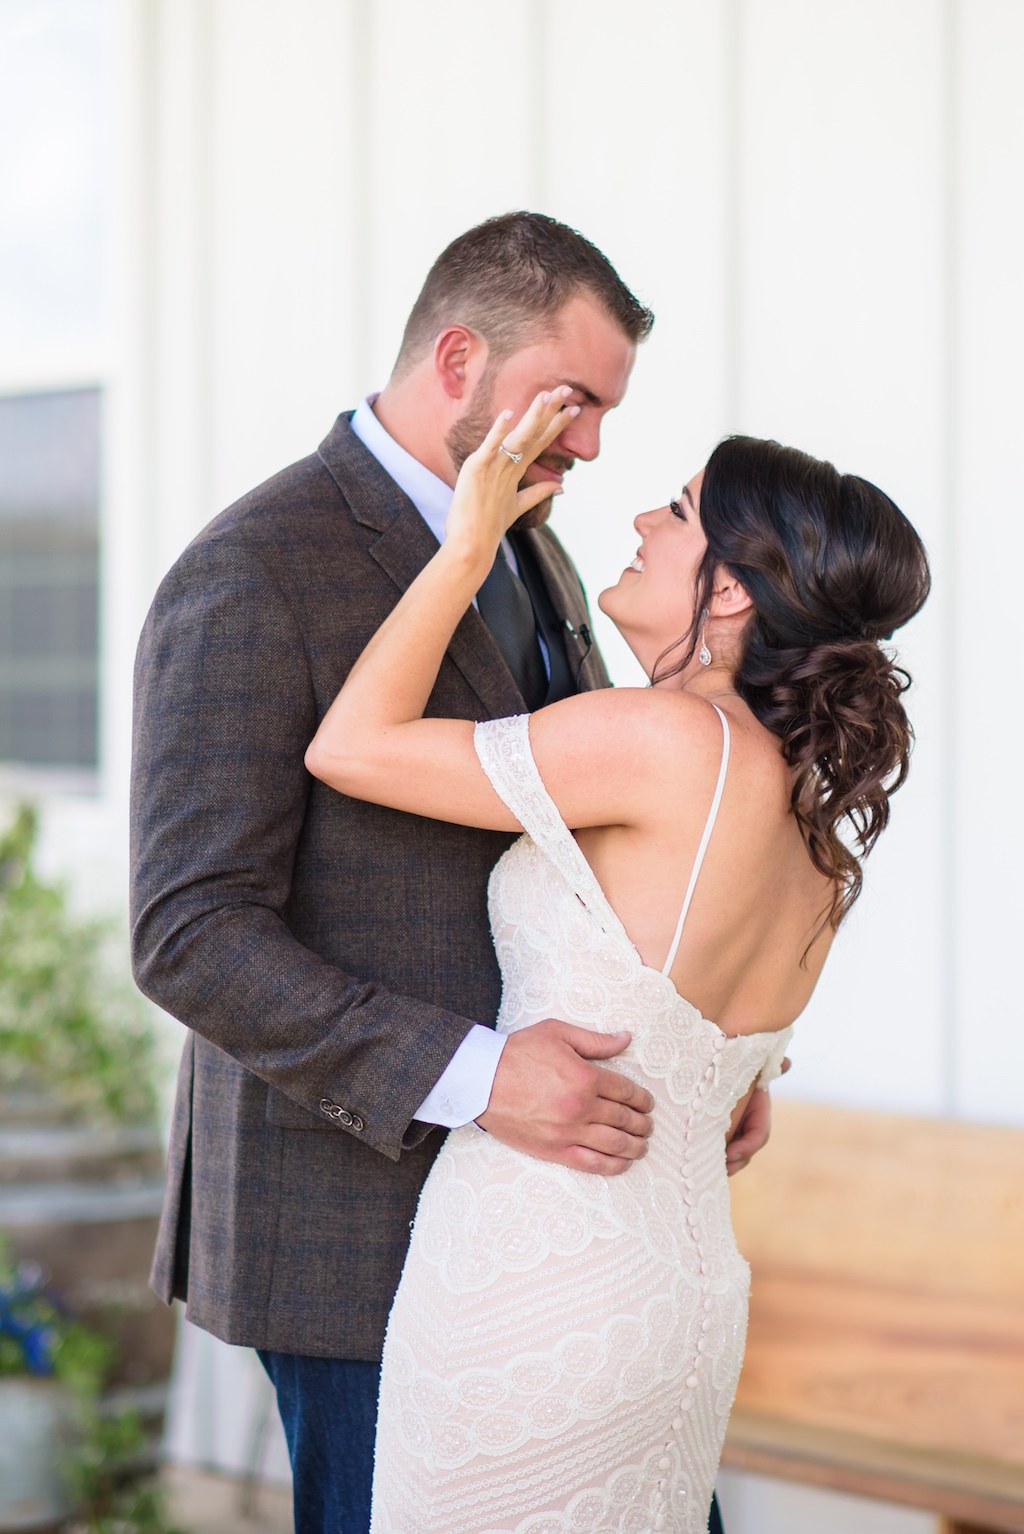 Tampa Bay Bride and Groom First Look Wedding Portrait, Bride in Lace Off the Shoulder Wtoo by Watters Fitted Wedding Dress, Groom in Plaid Brown Suit and Blue Tie